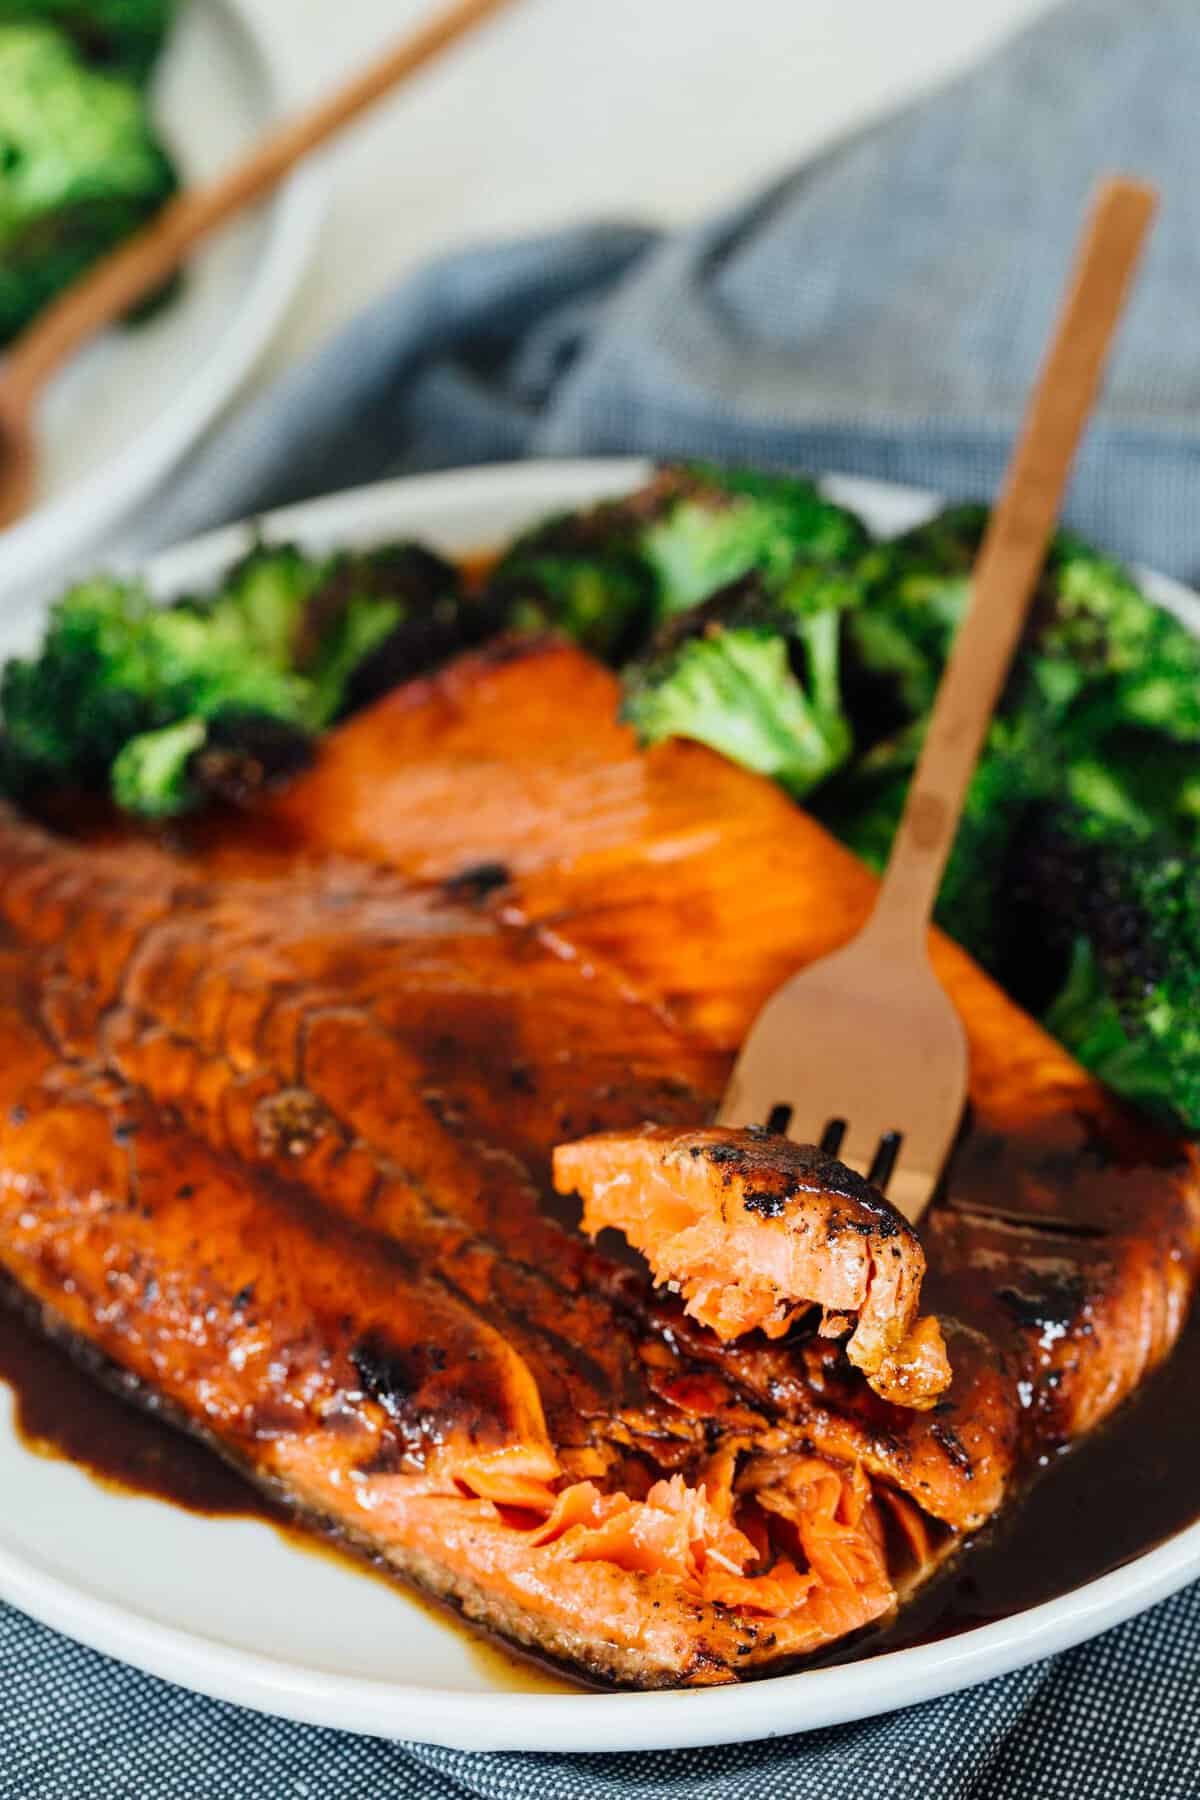 Who doesn't love a sweet and salty combination on top of buttery, flakey salmon? This sugared soy sauce salmon is a quick and easy weeknight meal! #meatlessmonday #seafood #salmon #salmonrecipes #soysauce #asian